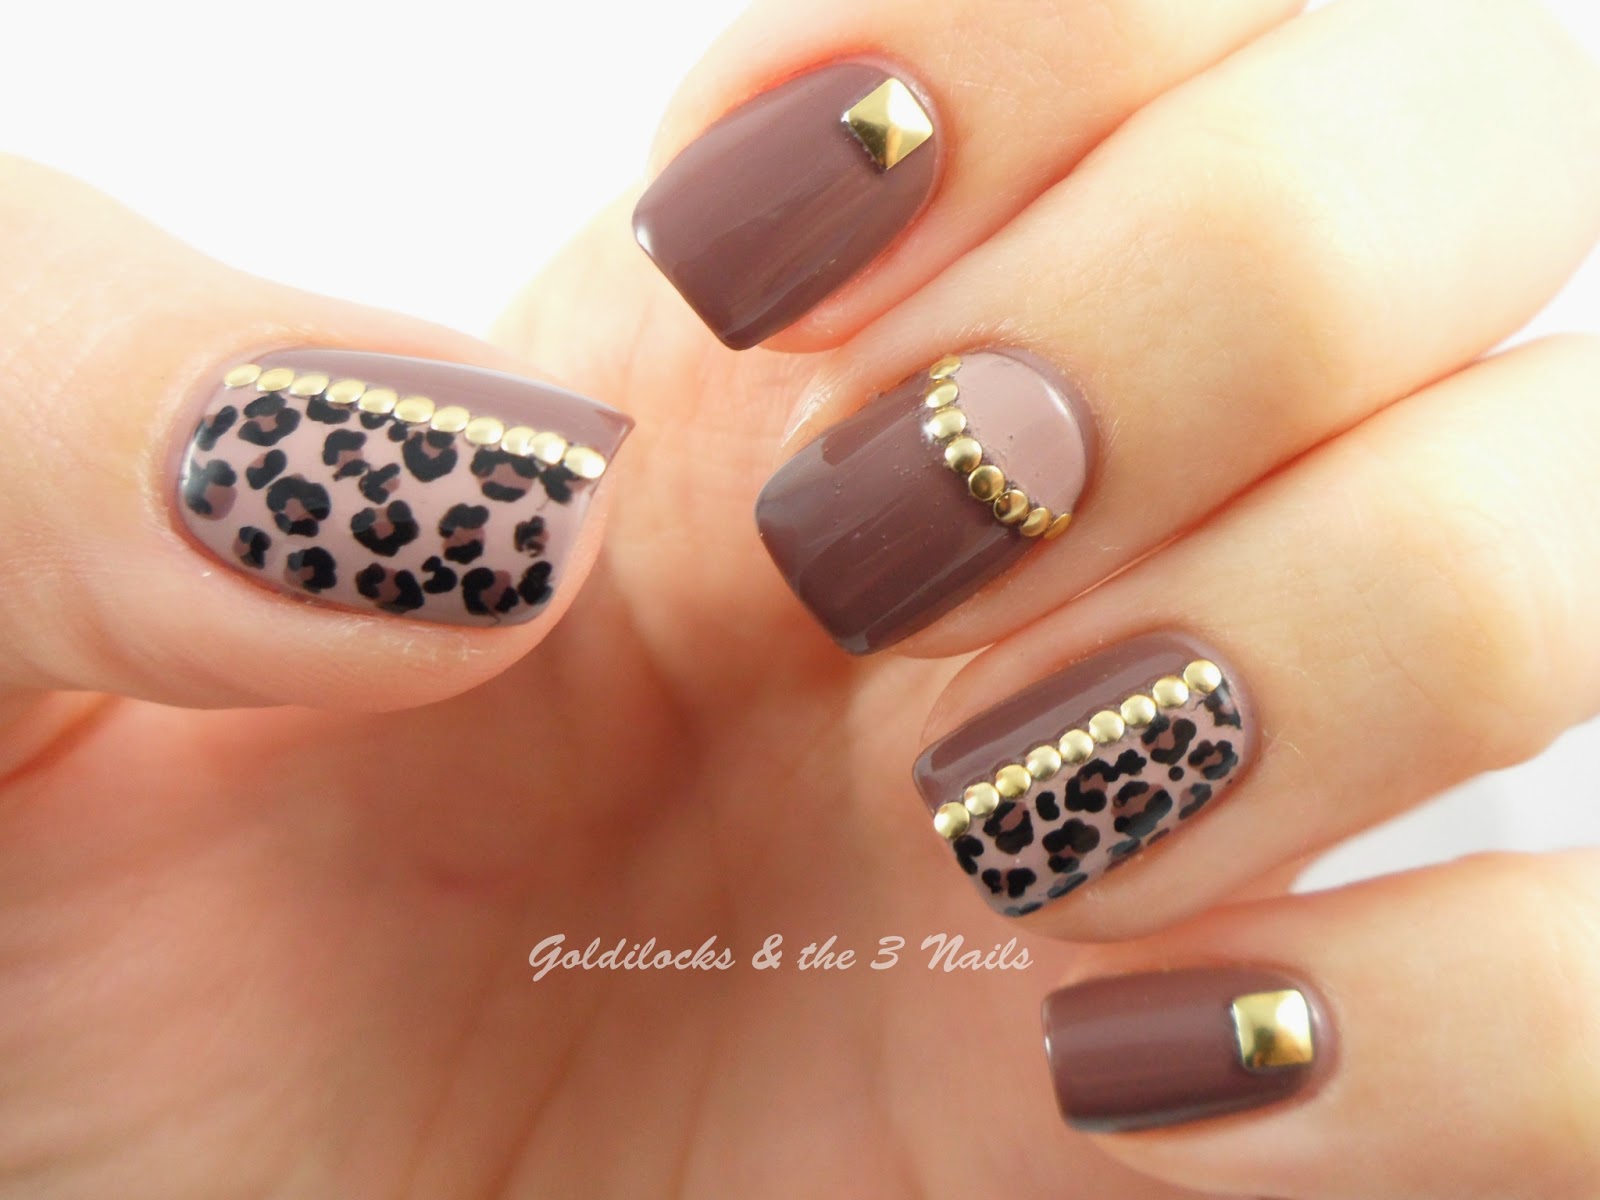 1. Brown and Black Leopard Print Nail Art - wide 7